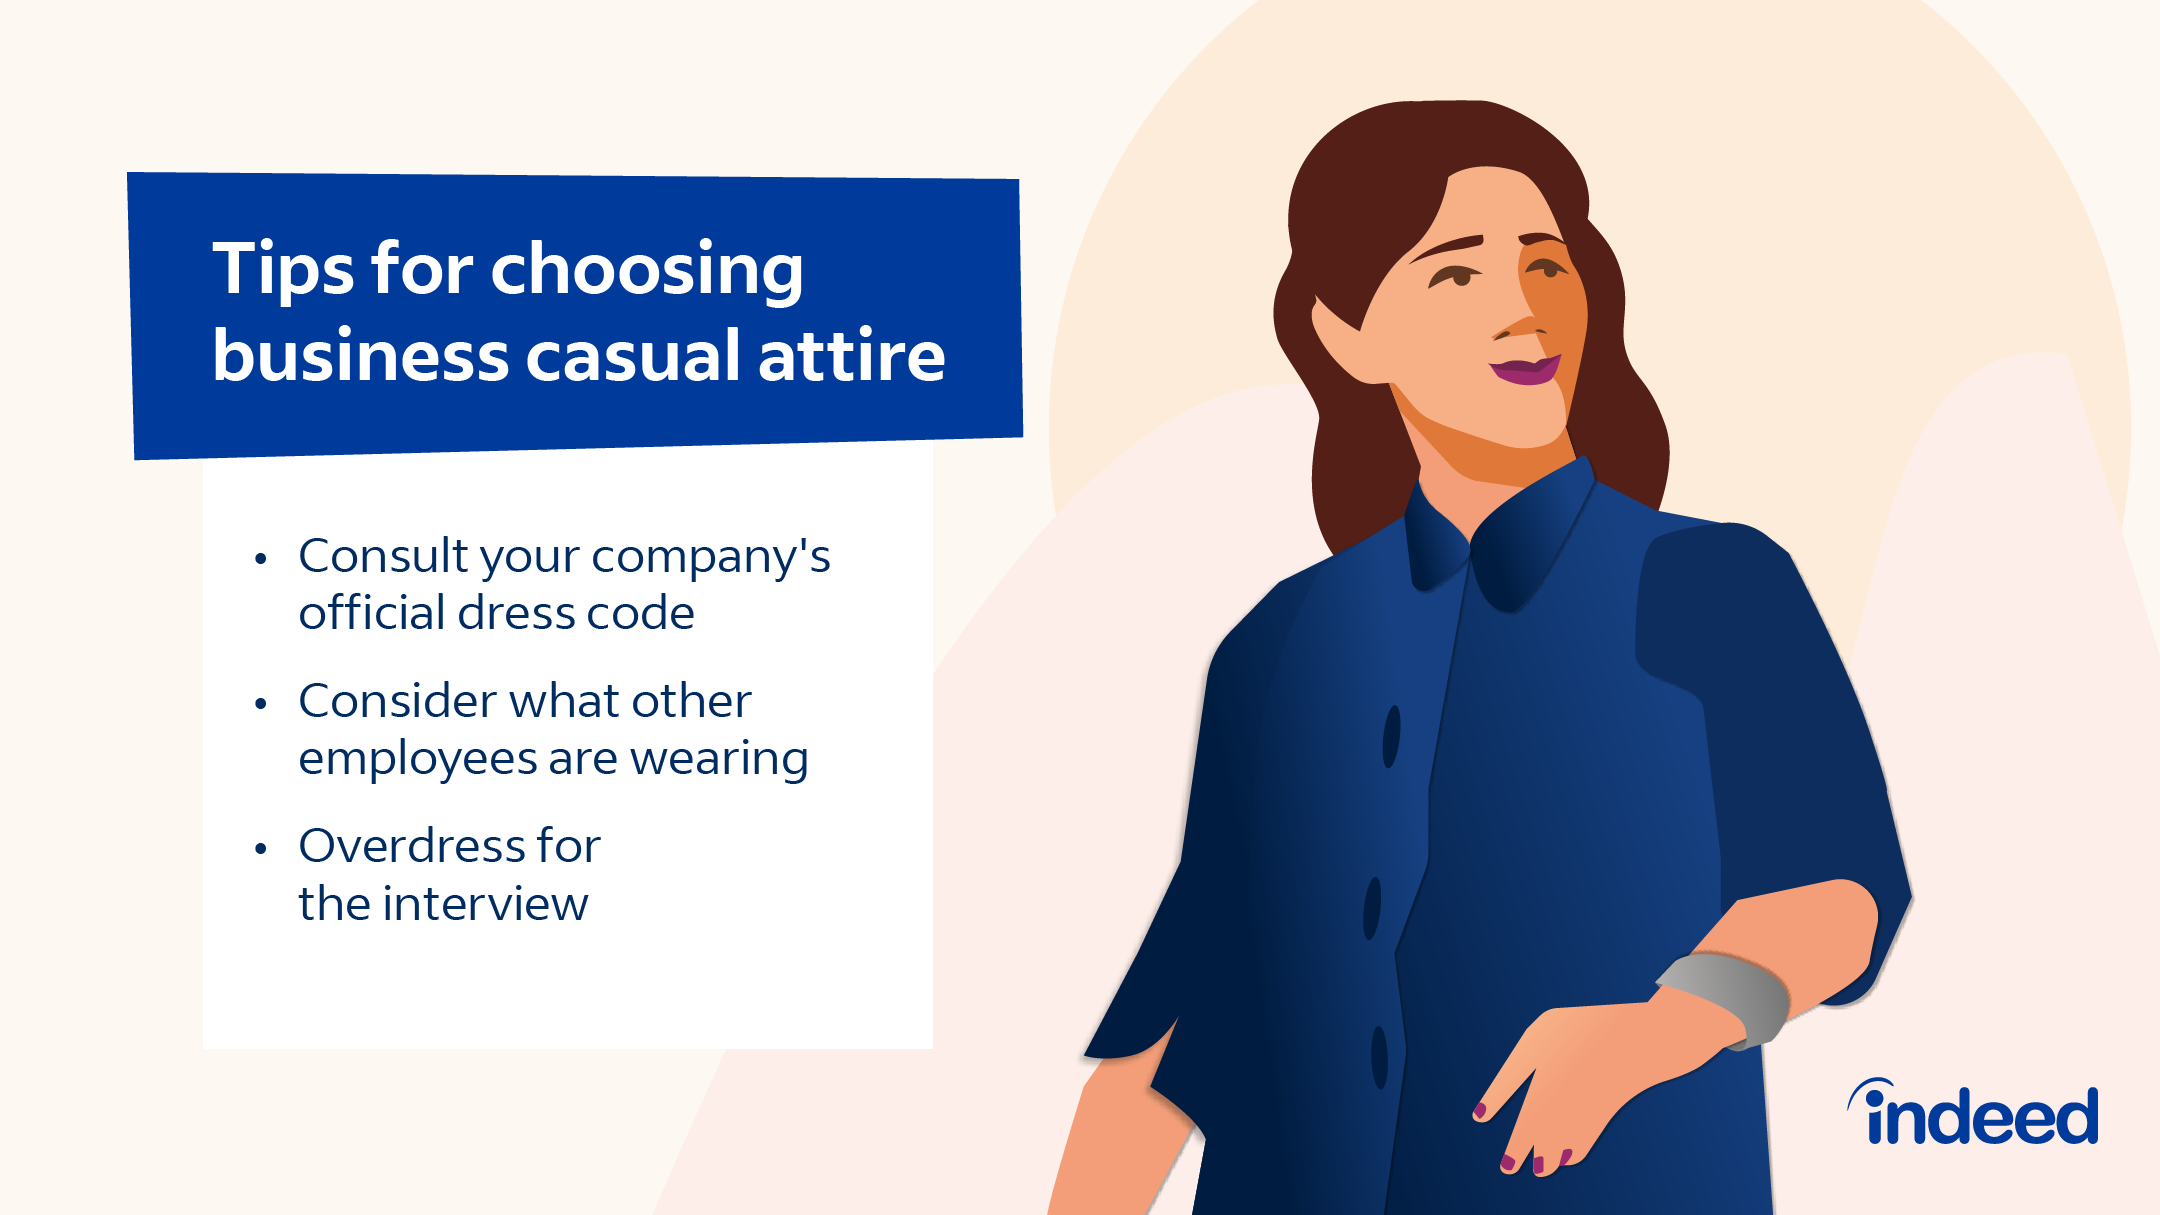 Business Casual for Women -- Without Being Overdressed